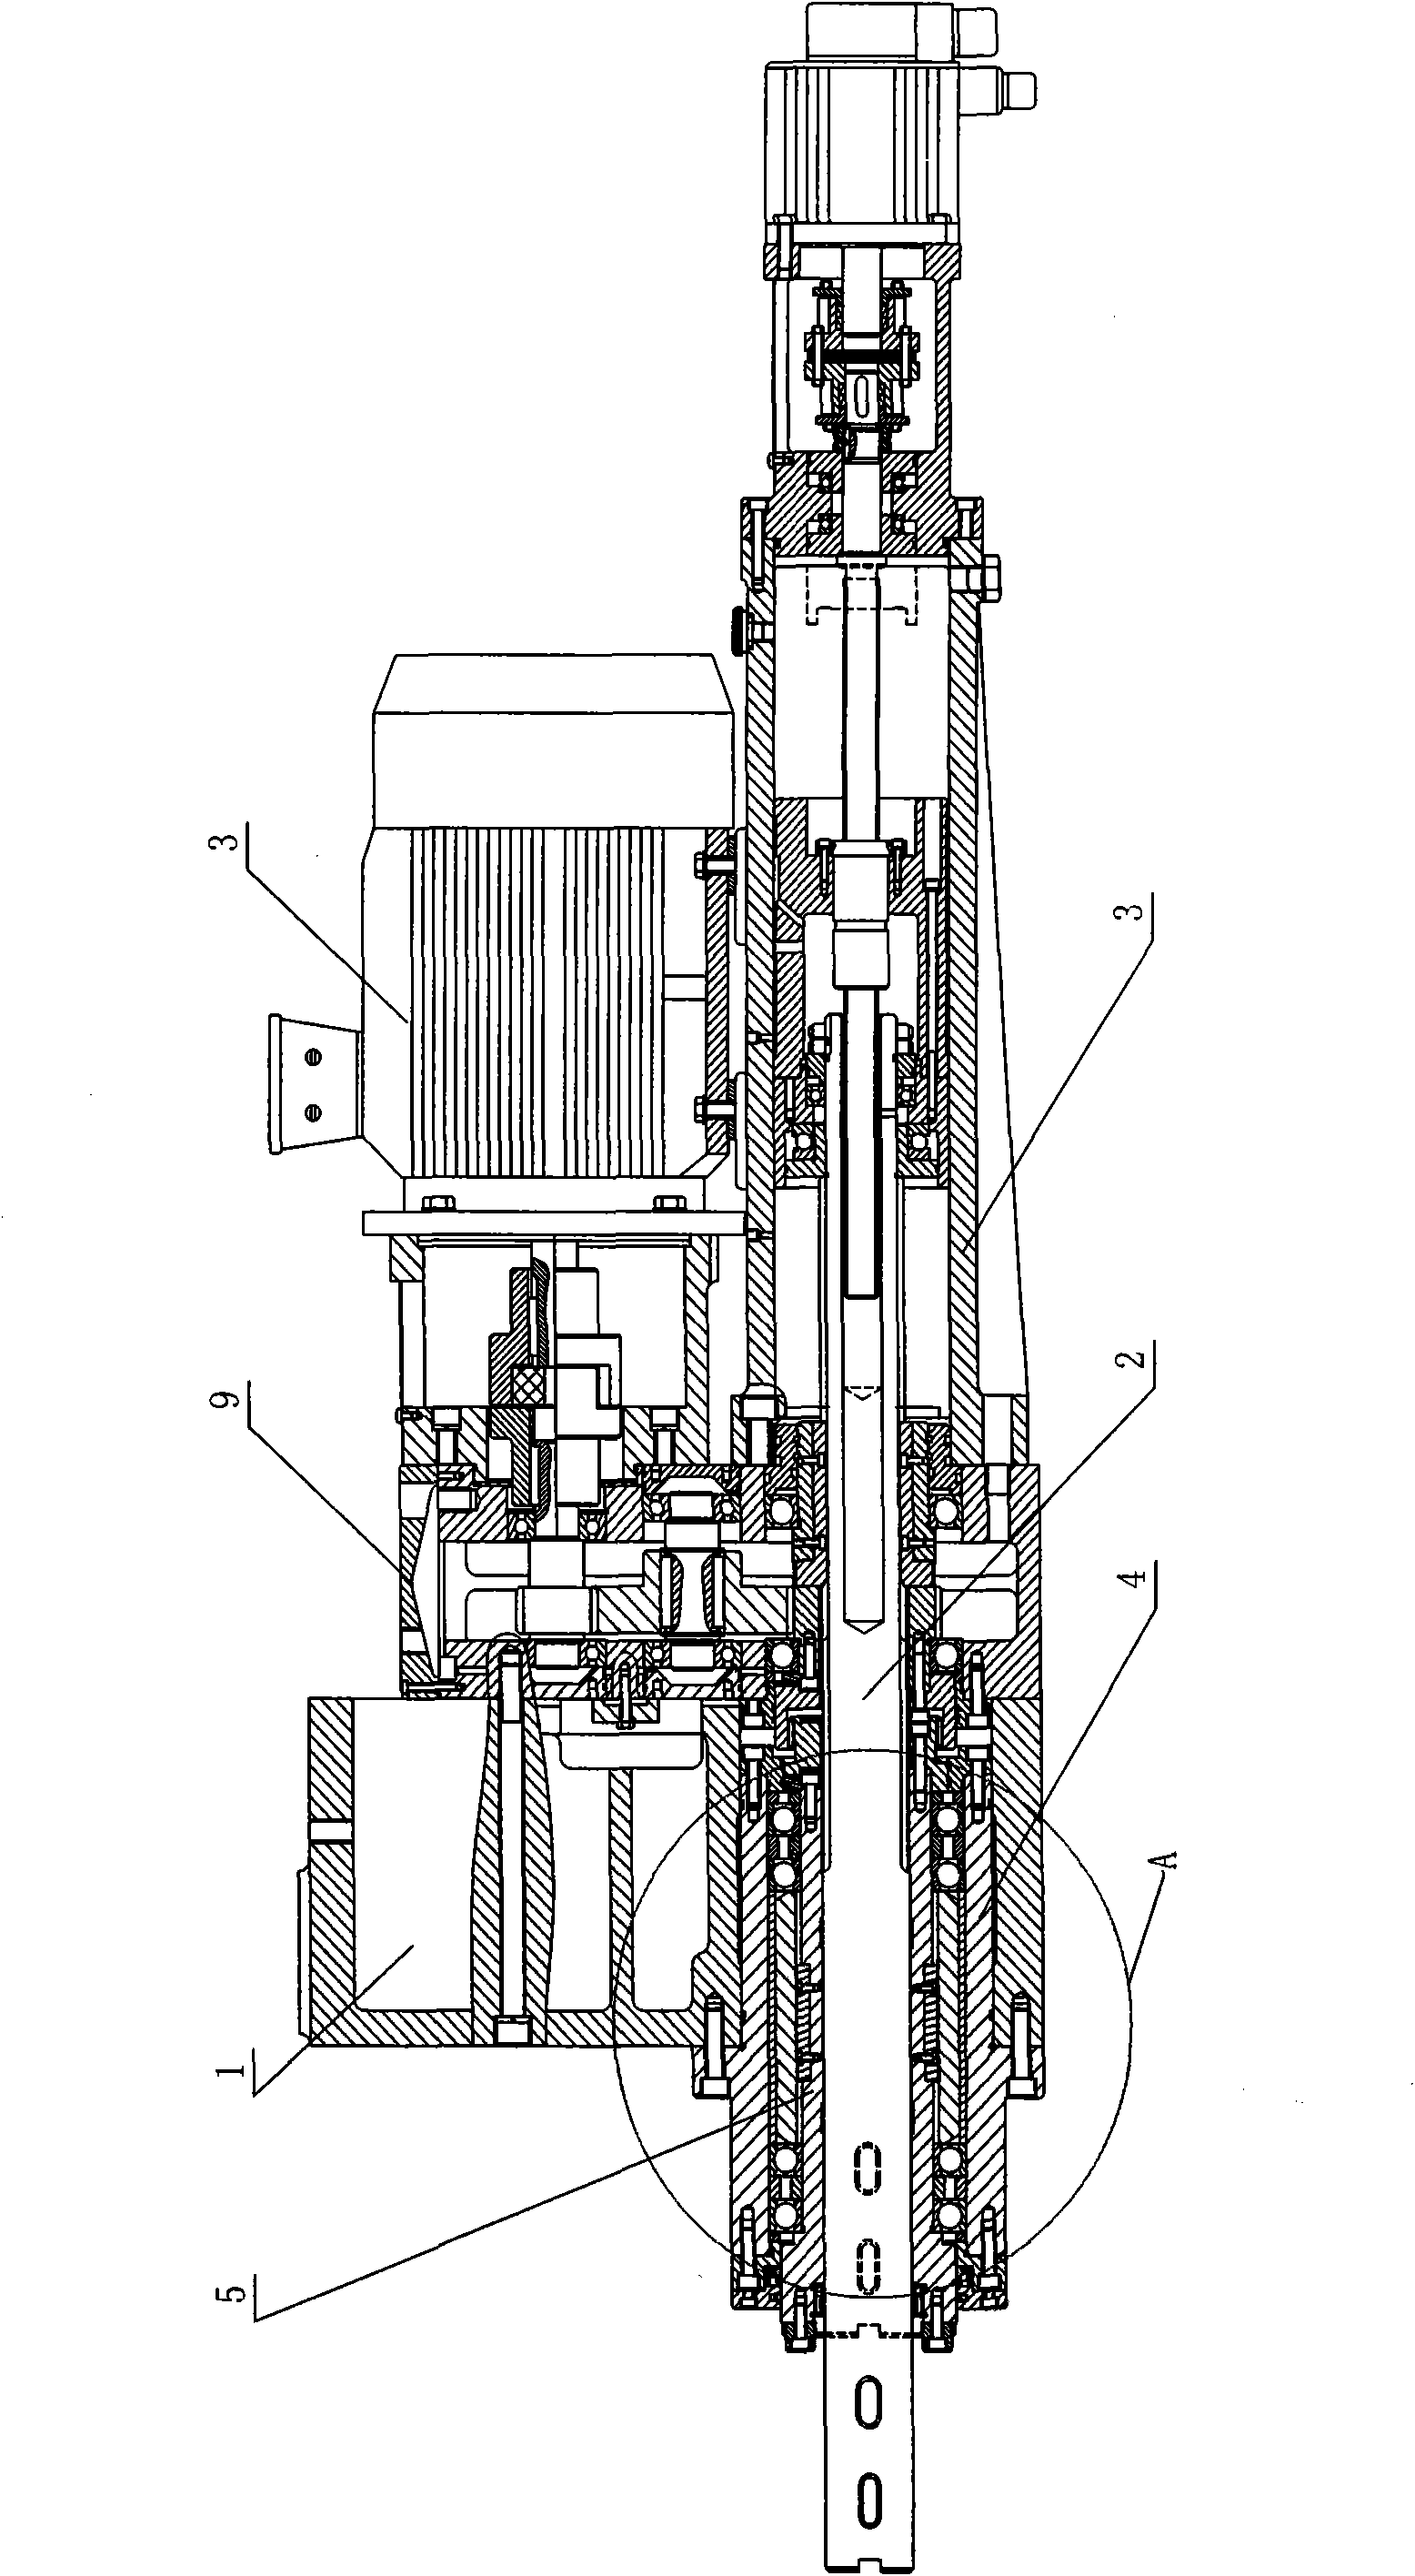 Sleeve barrel structure of horizontal type numerical control boring-milling machine